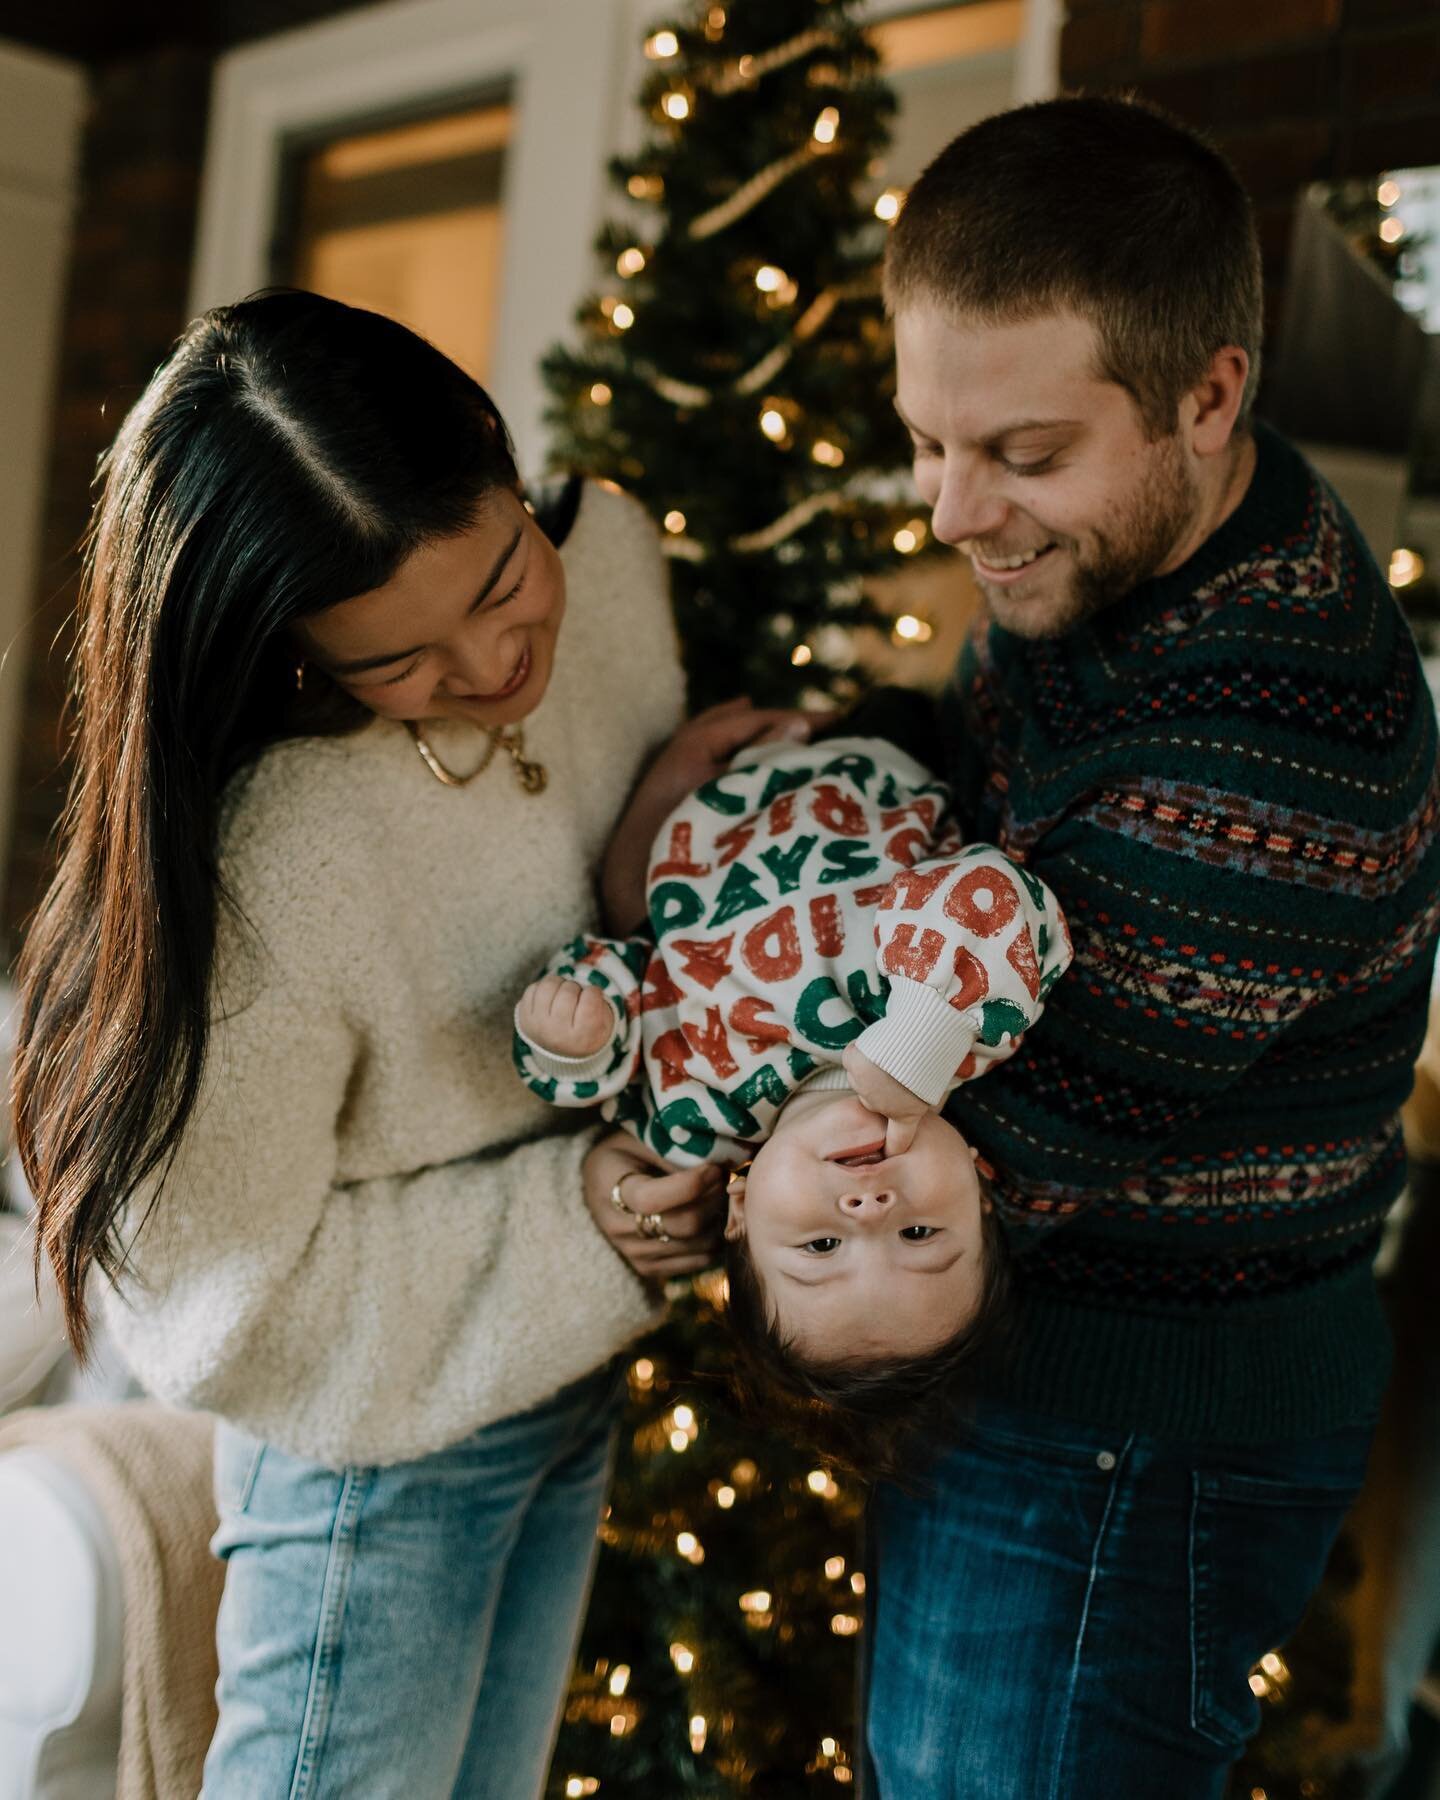 Just Nico being a funny little 🥜 / the daredevil that he is!
Had a blast shooting with @lydiaivyphotography again to capture our first Christmas as a family 🧑🏼&zwj;🎄🎅🏼👼🏻 (but really more like 😈) 🤣😂